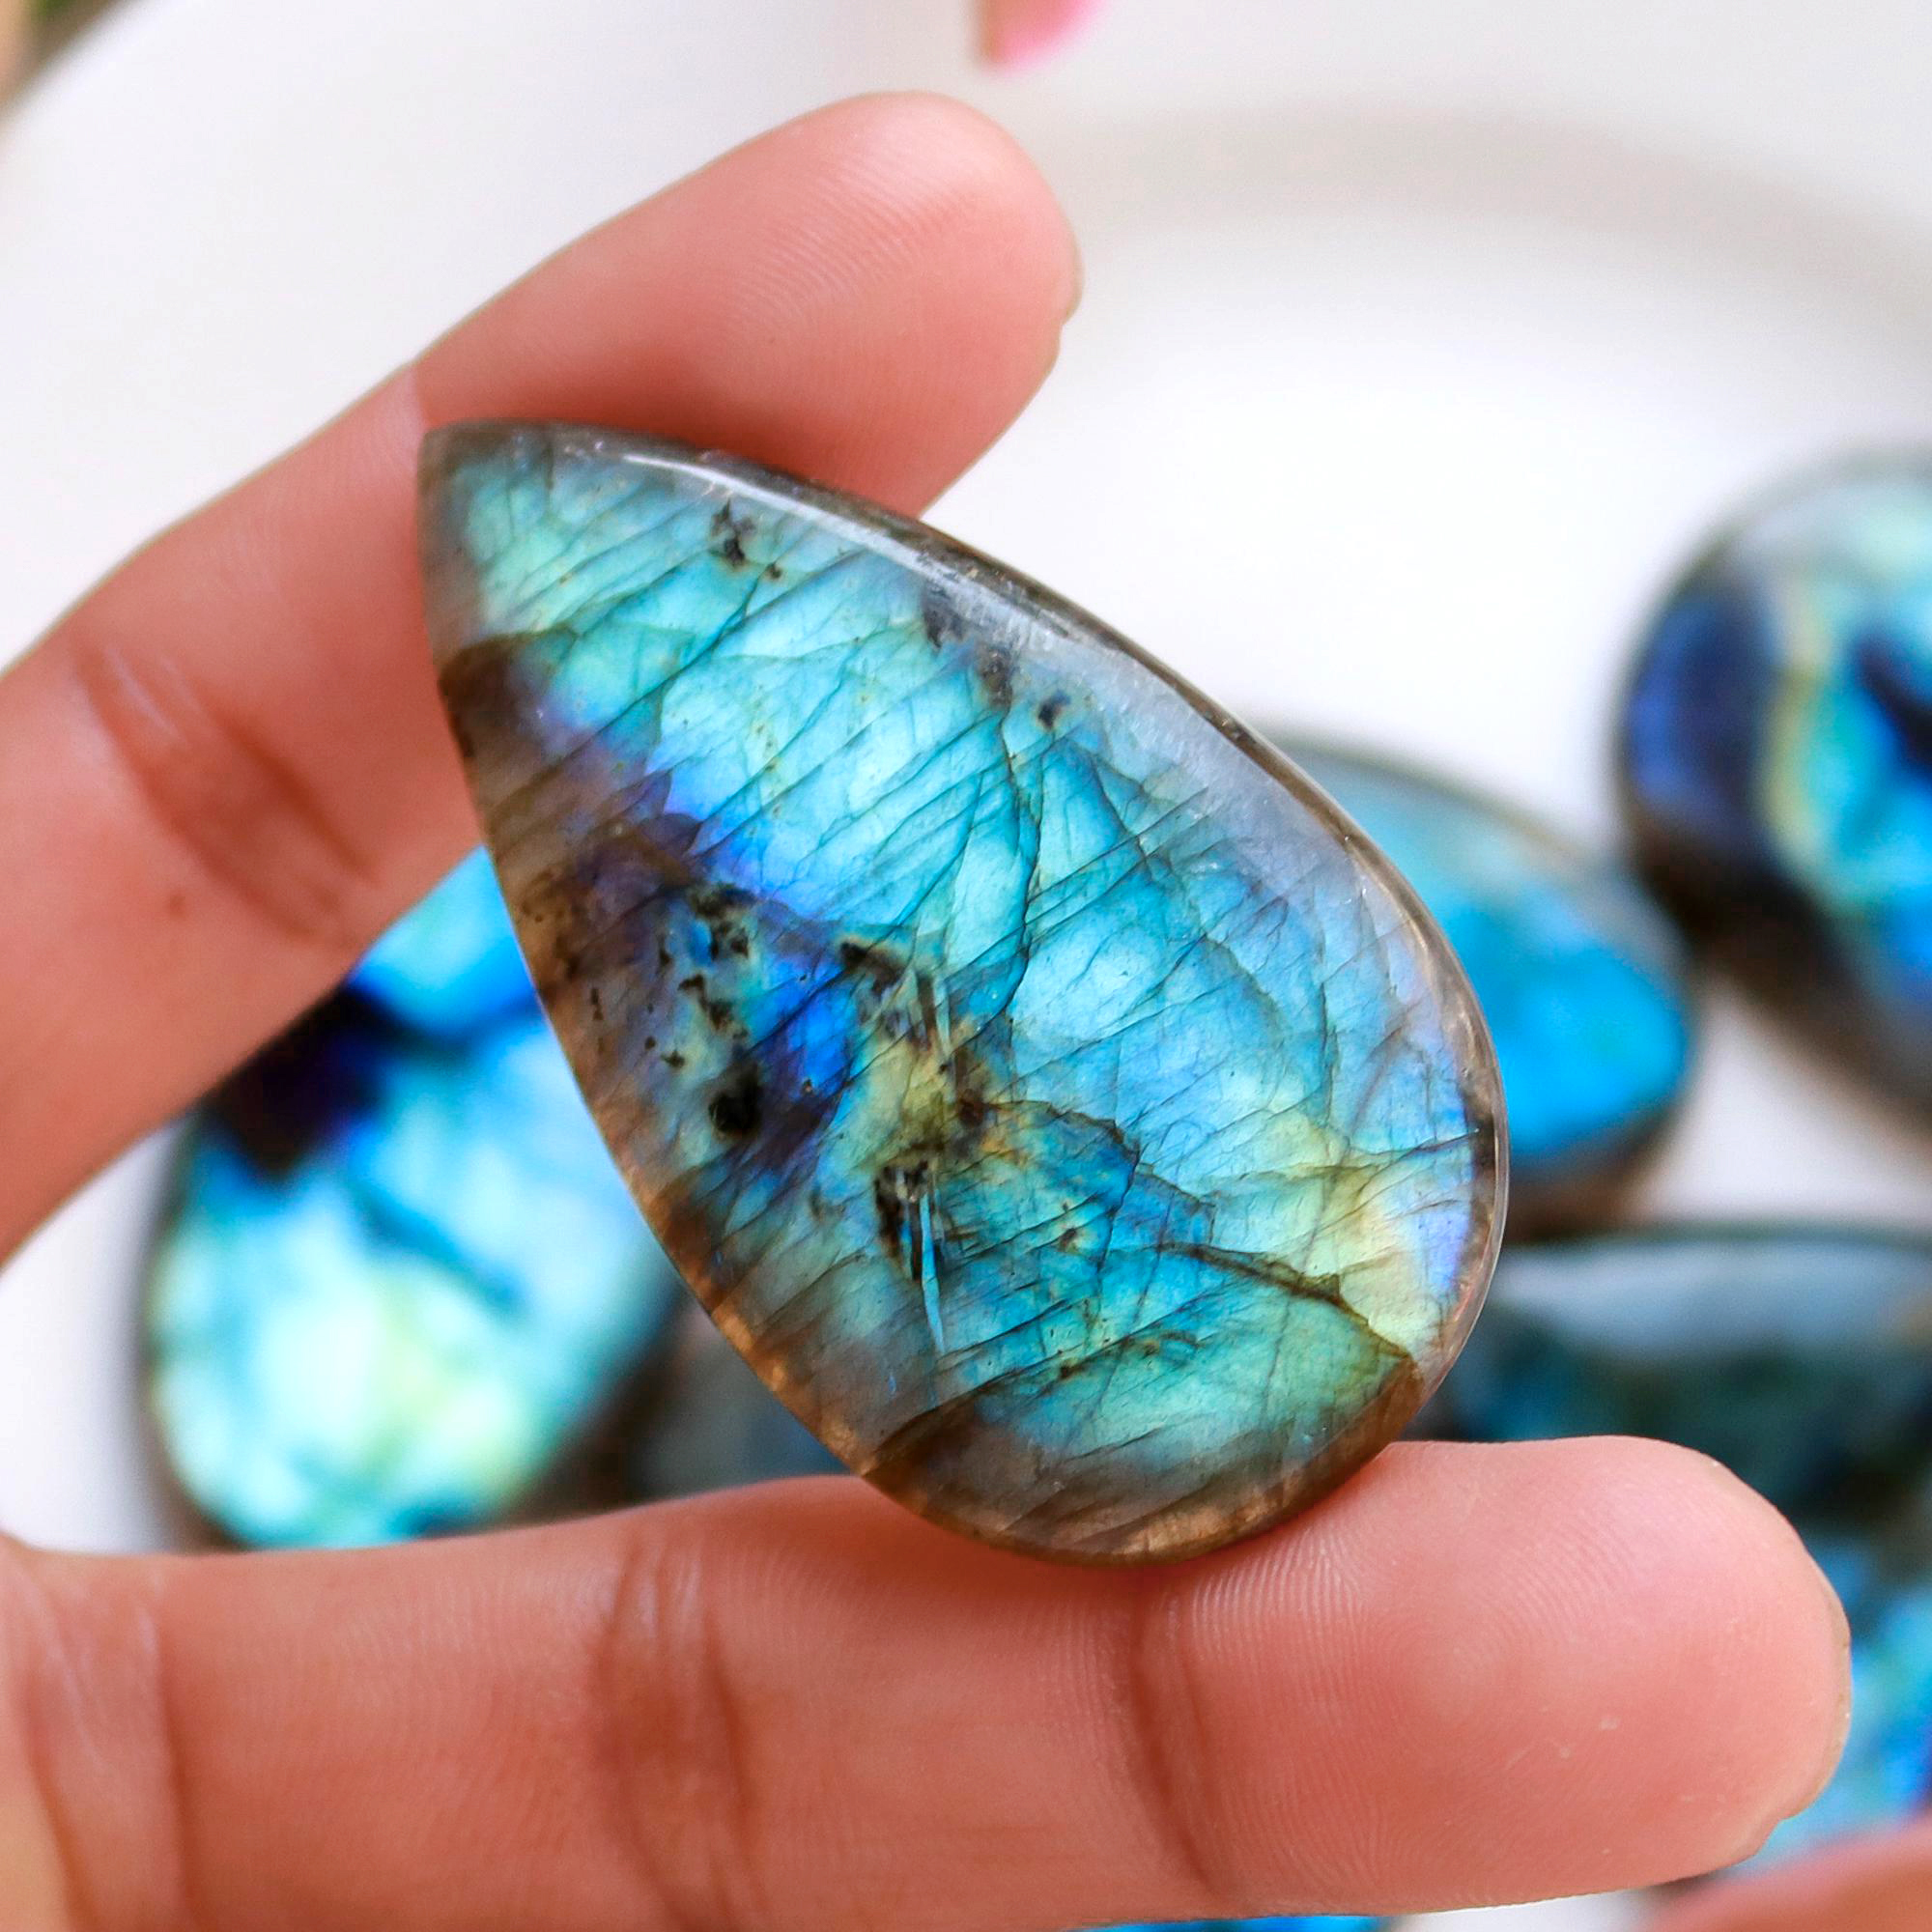 8 Pcs.670 Cts Natural labradorite Cabochon Loose Gemstone For Jewelry Wholesale Lot Size 55x30 40x24mm